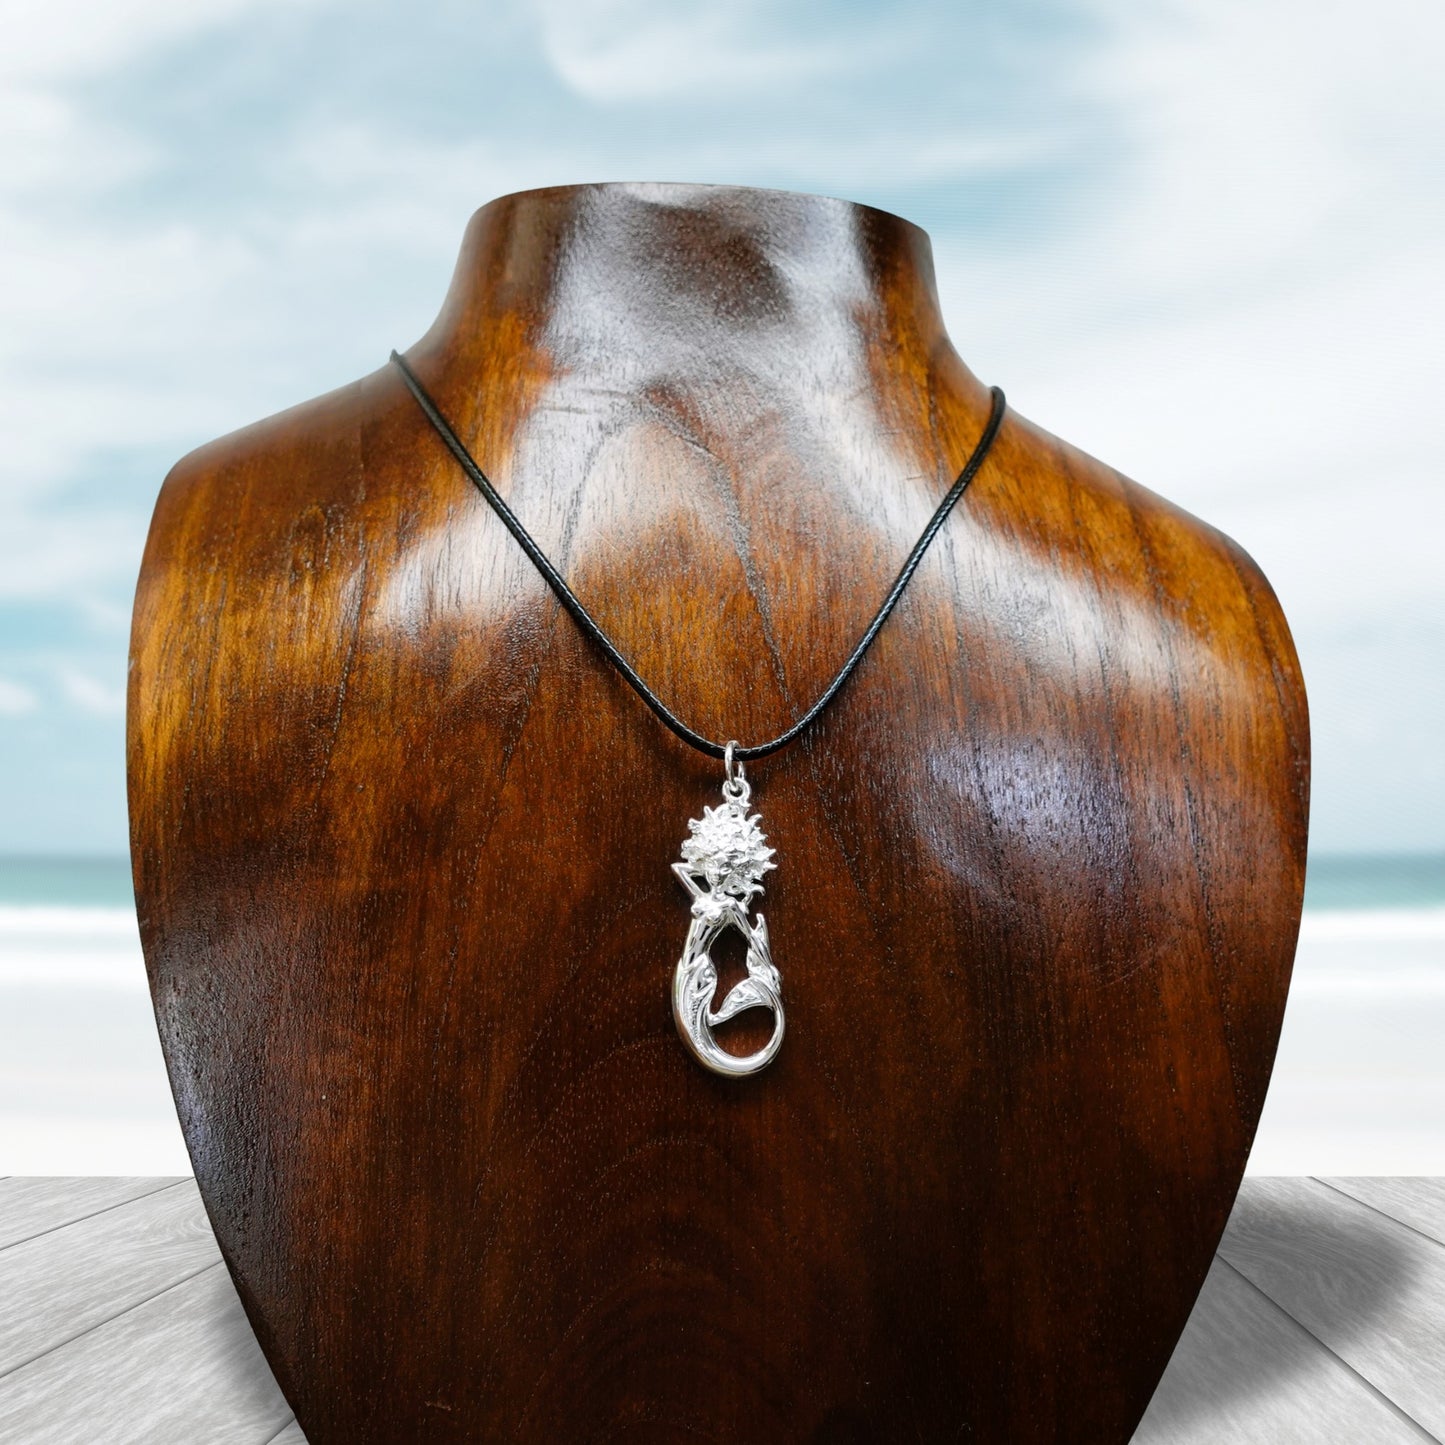 Mermaid necklace. Made from highly polished, tarnish resistant silver, strung on a strong cord. © Adrian Ashley